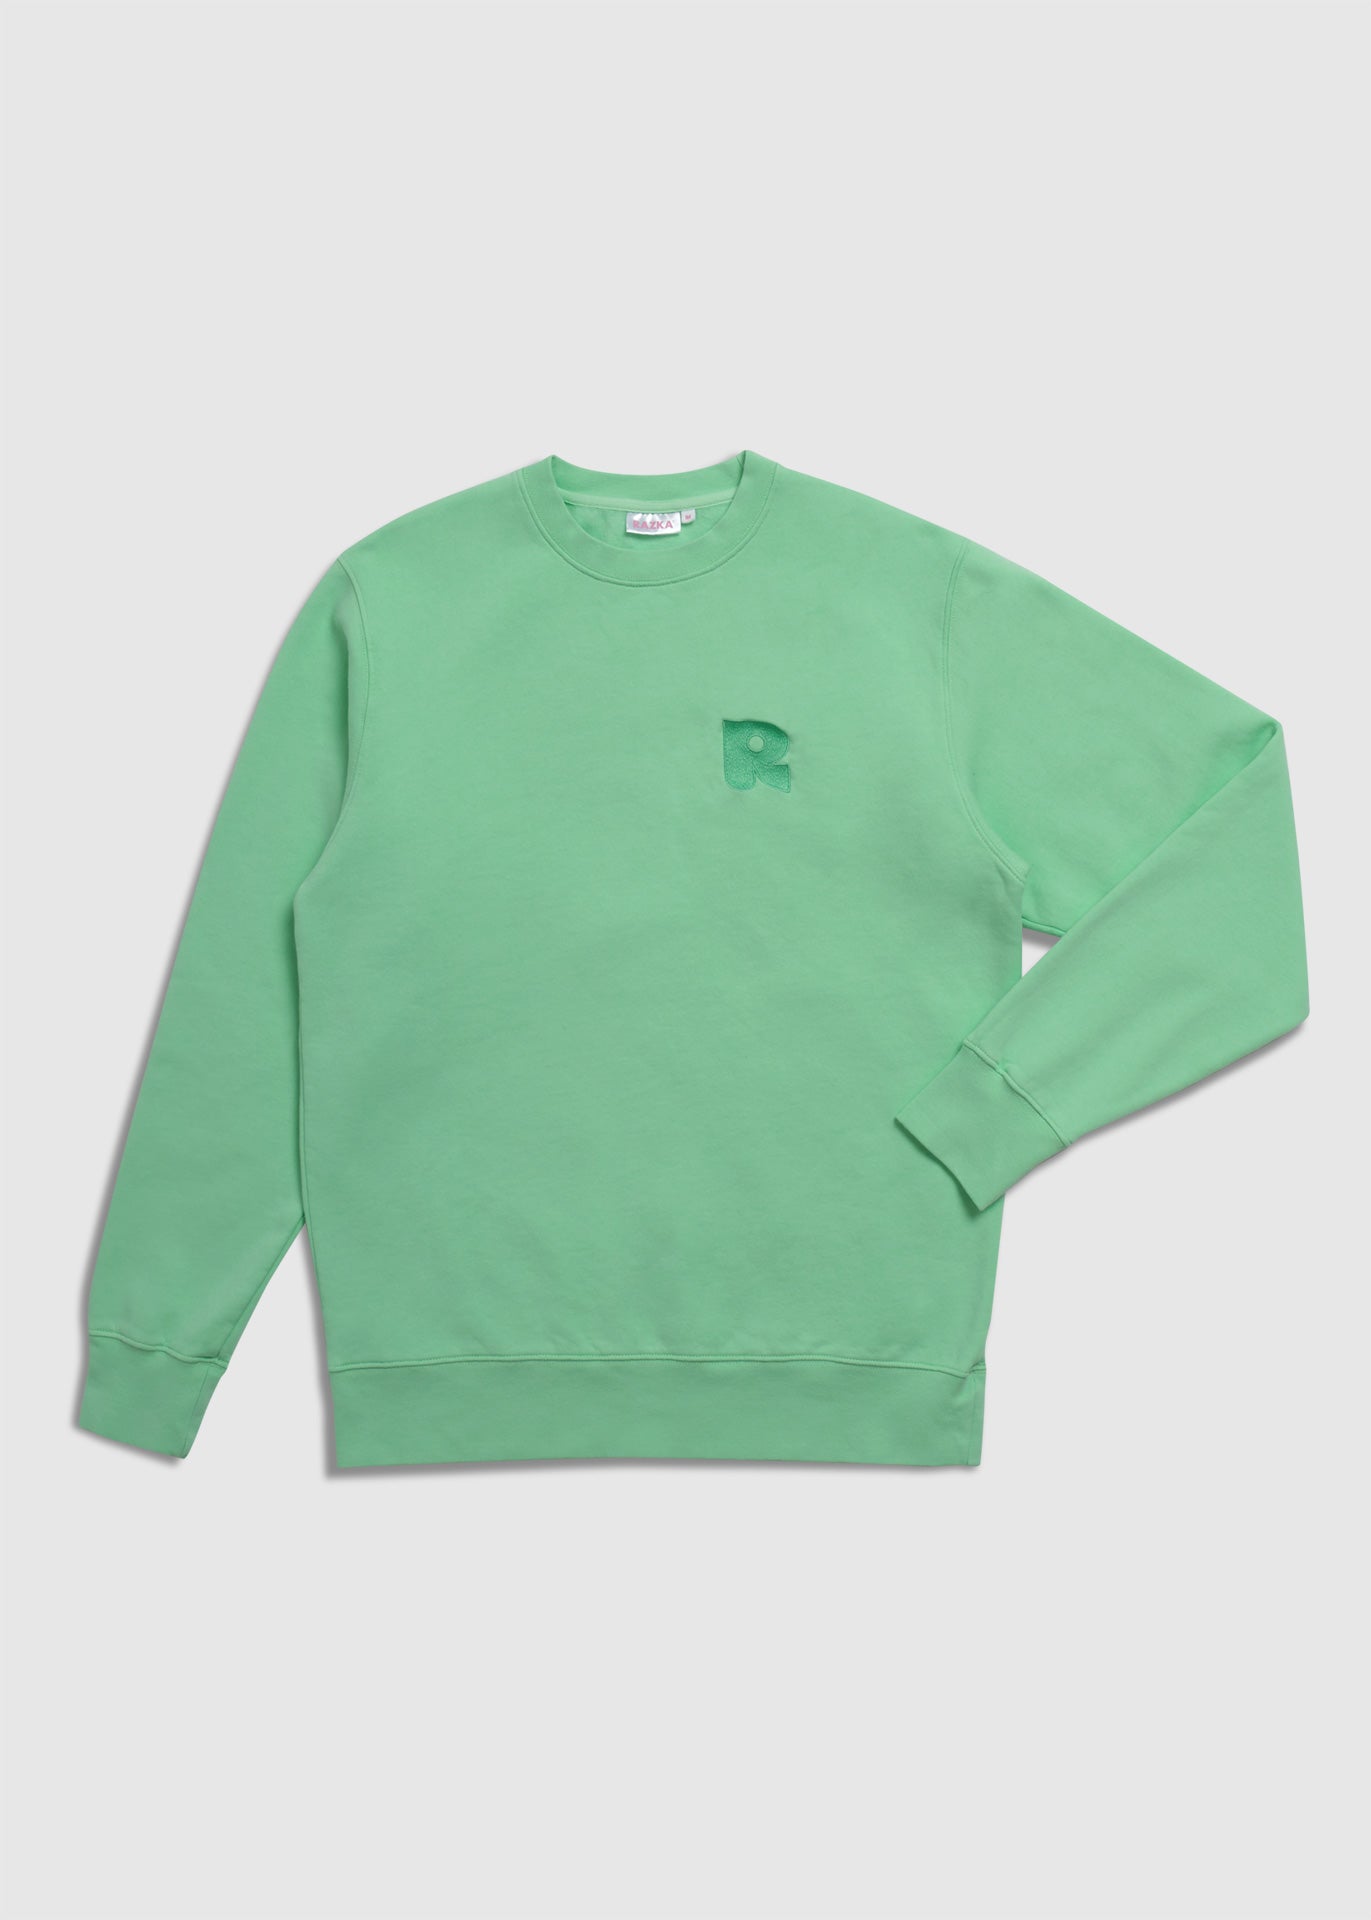 The Green sweater